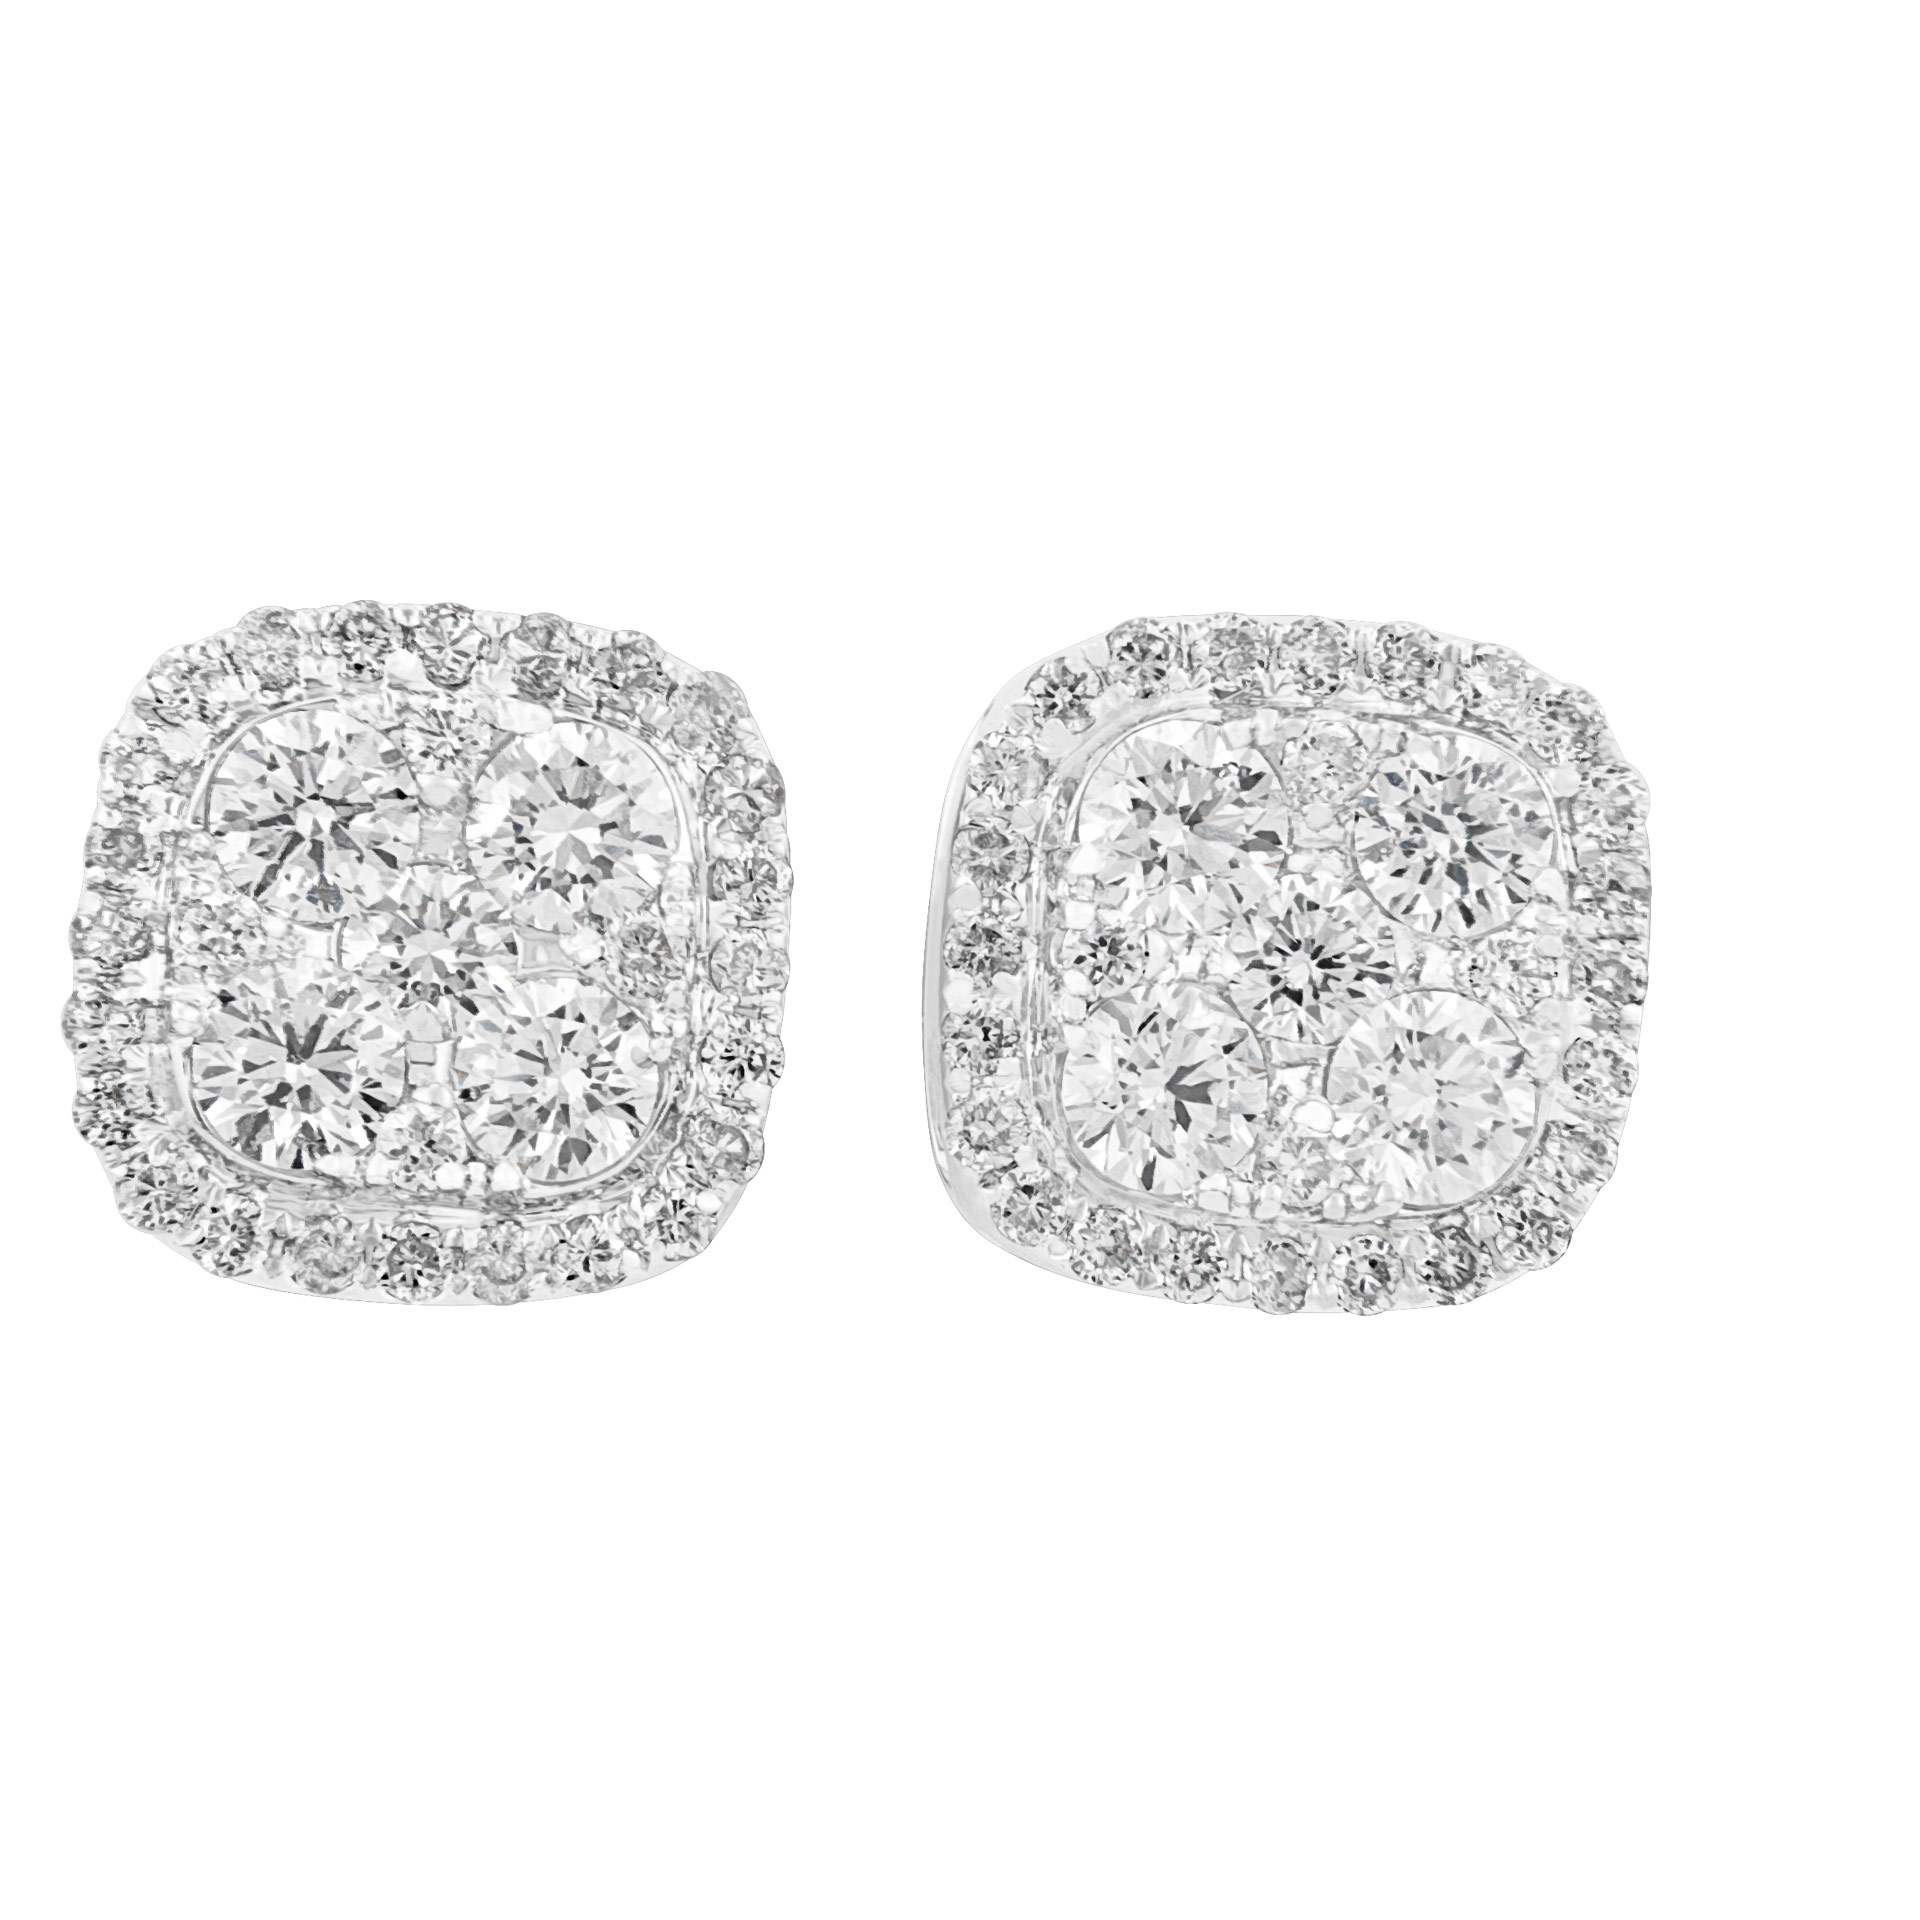 Illusion studs in 18K white gold image 1